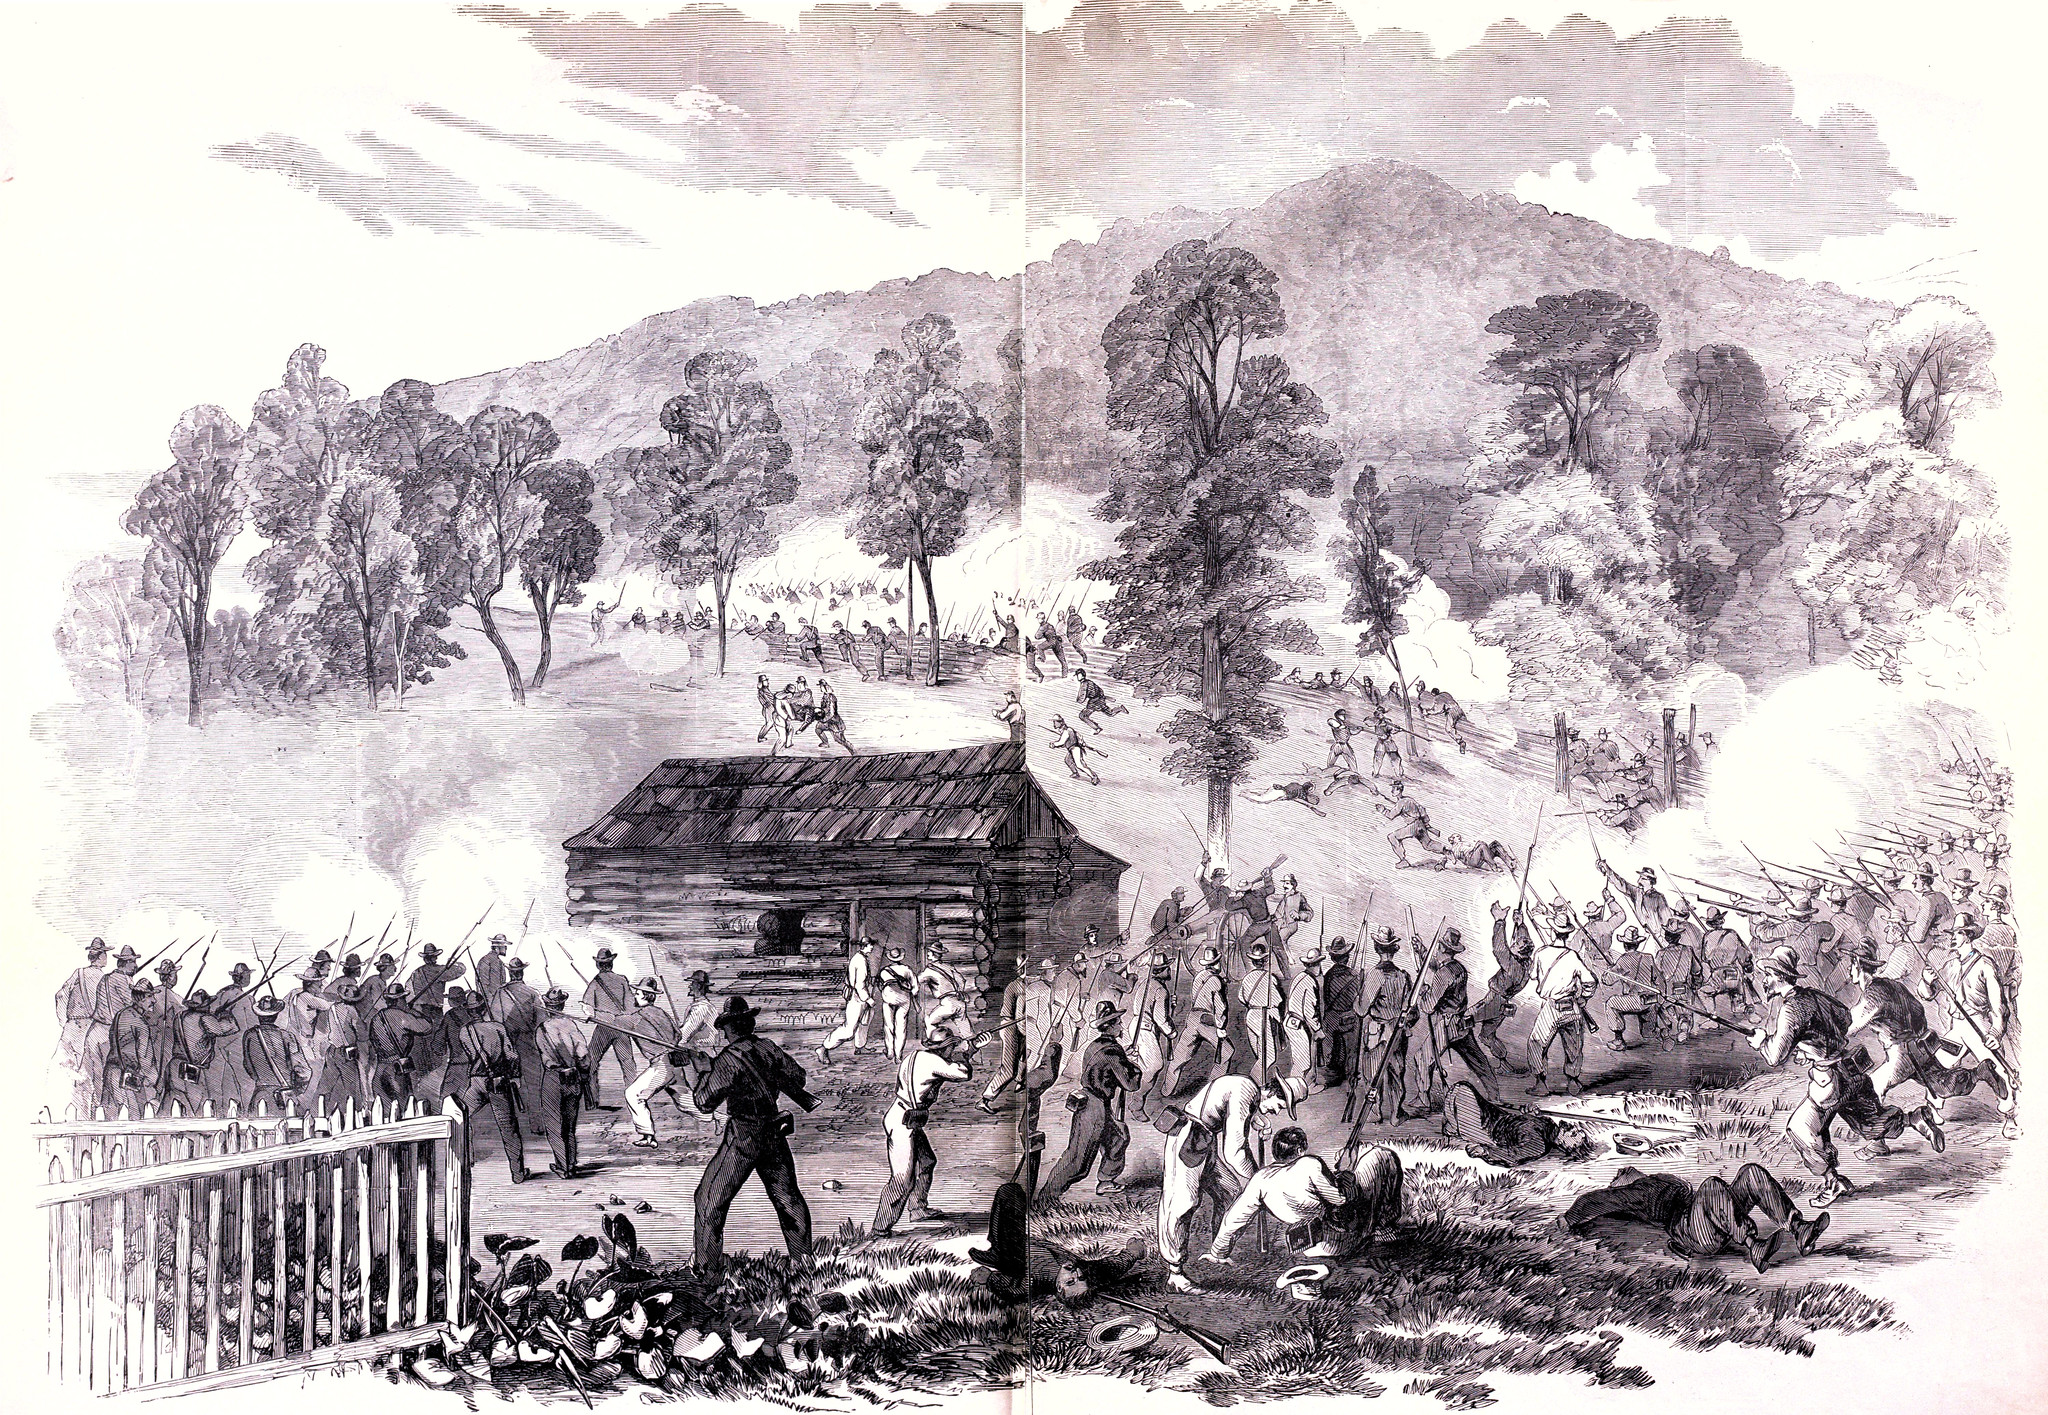 The Battle of Rich Mountain, Beverly Pike, Va., between a Division of Major General McClellan's Command, led by General Rosecrans, and the Confederate Troops under Colonel Pegram, July 11th, 1861